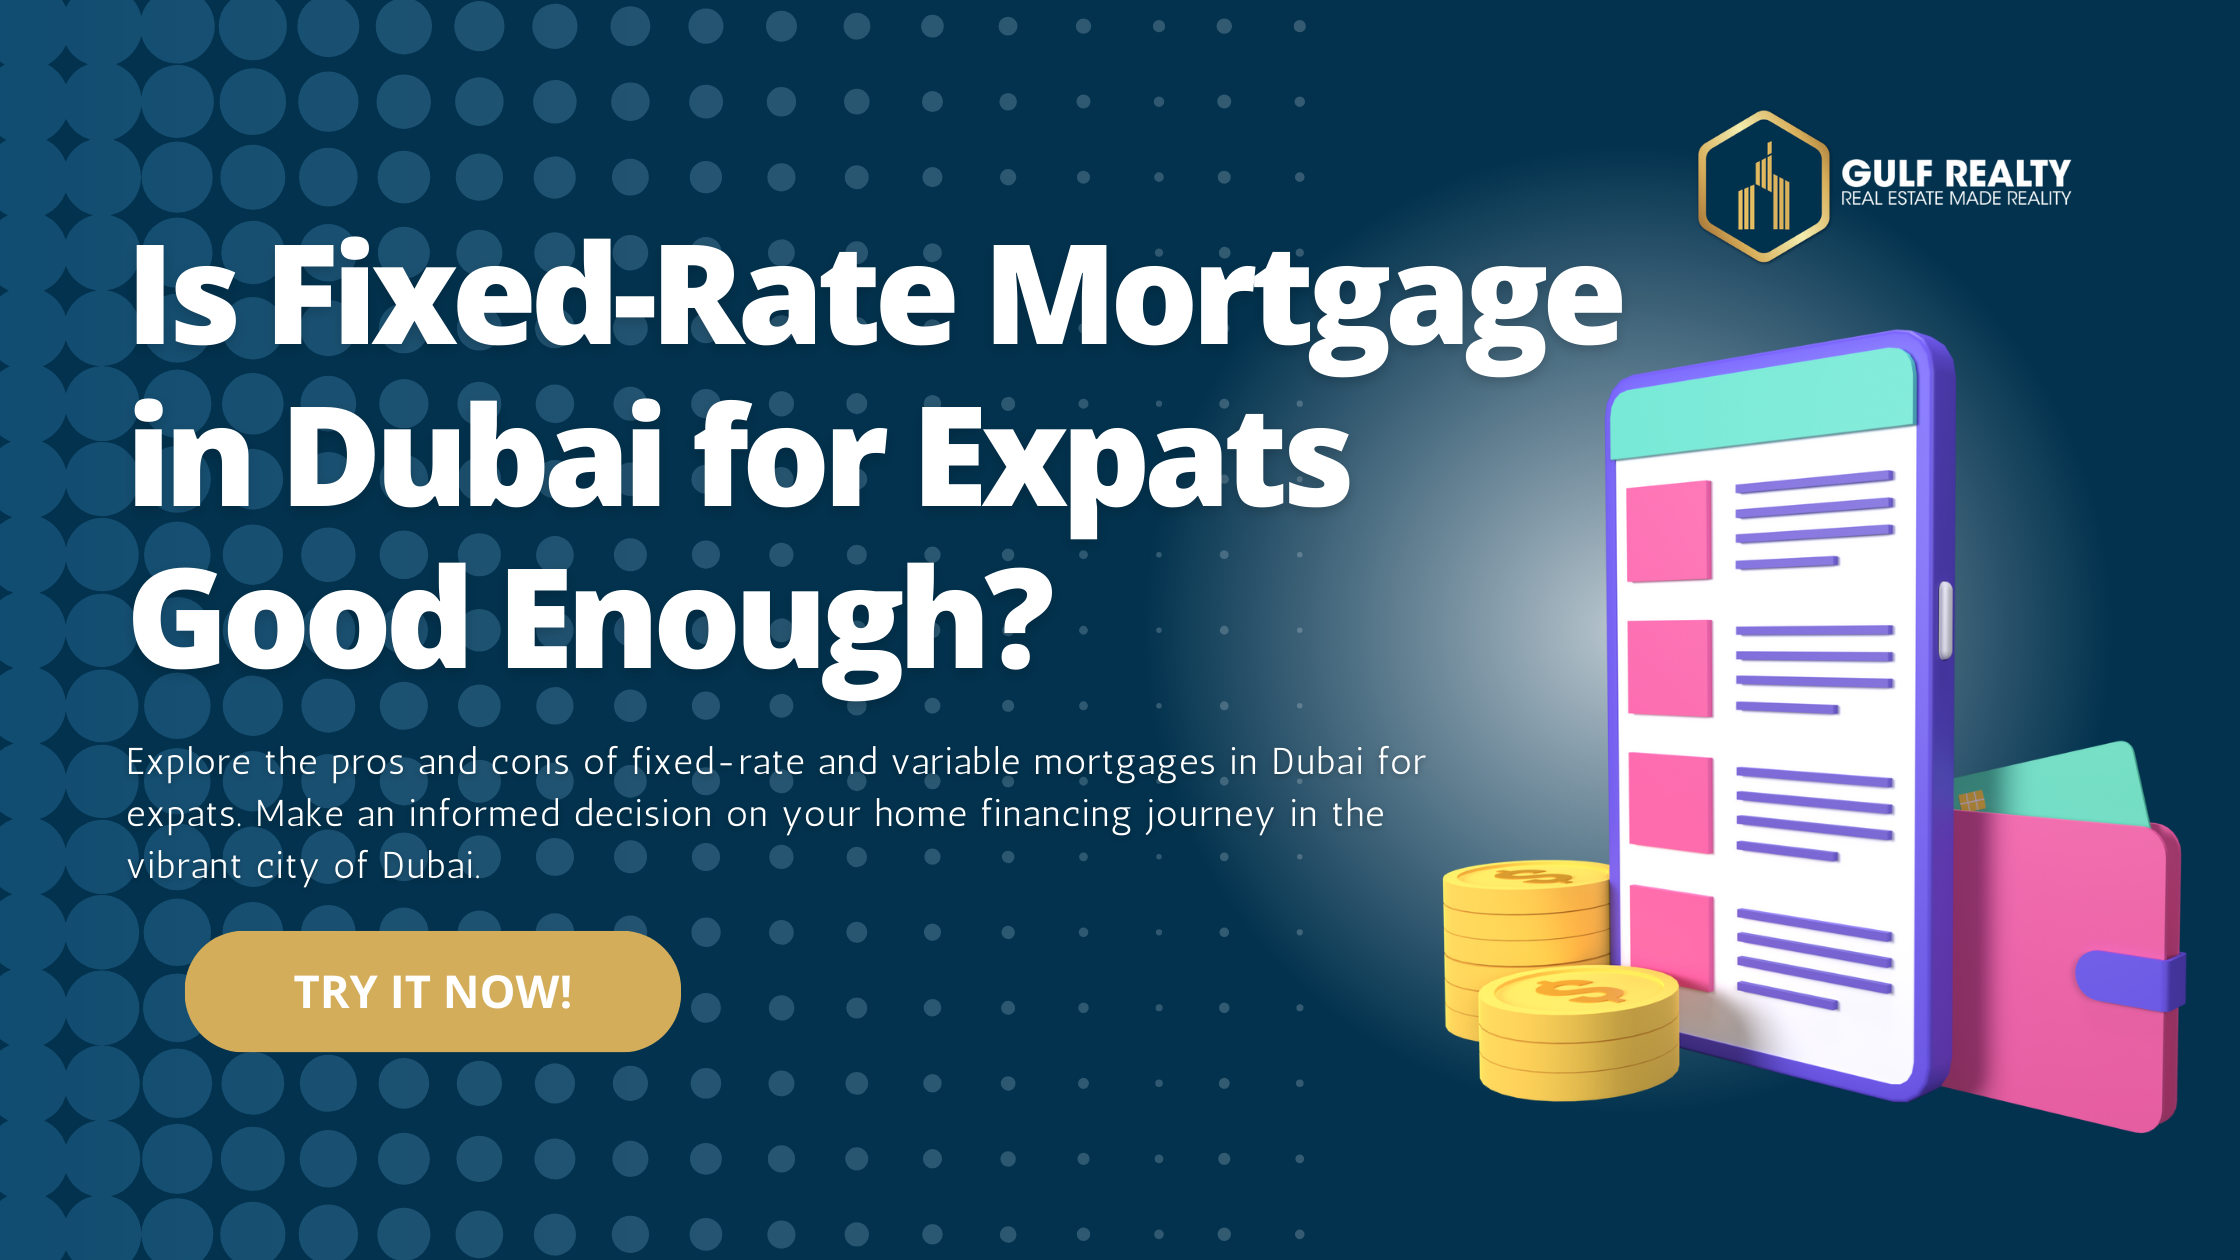 Is Fixed-Rate Mortgage in Dubai for Expats Good Enough?